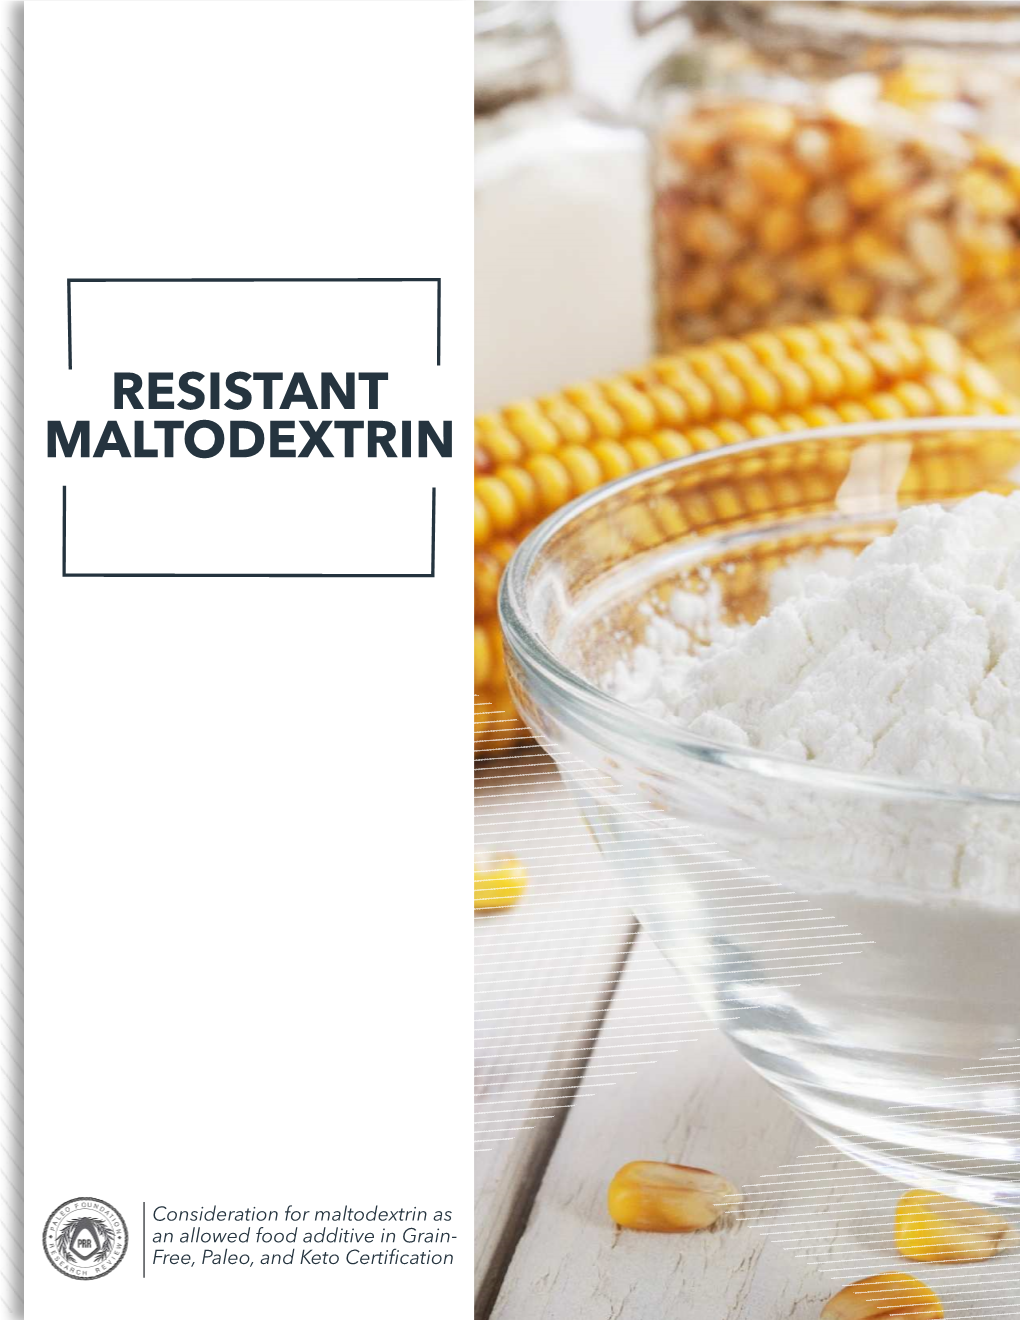 Is Resistant Maltodextrin a Toxic Food Additive?